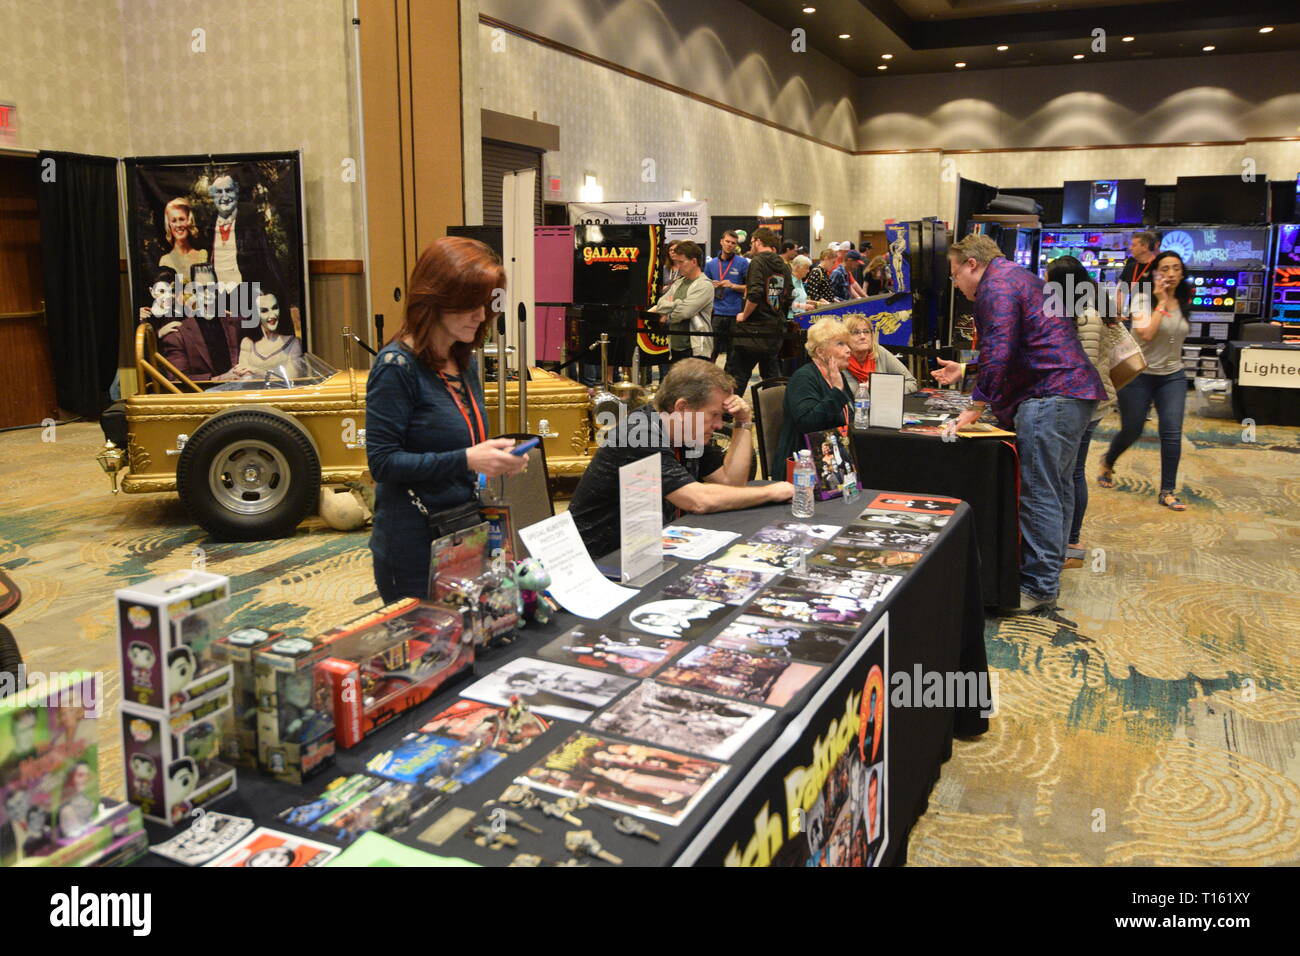 Frisco, USA. 23rd March, 2019.  Butch Patrick and Pat Priest, stars from The Munsters television program, await autograph seekers at the Texas Pinball Festival at the Embassy Suites Dallas – Frisco Hotel and Convention Center. Credit: Mariana Fernandez/Alamy Live News Stock Photo